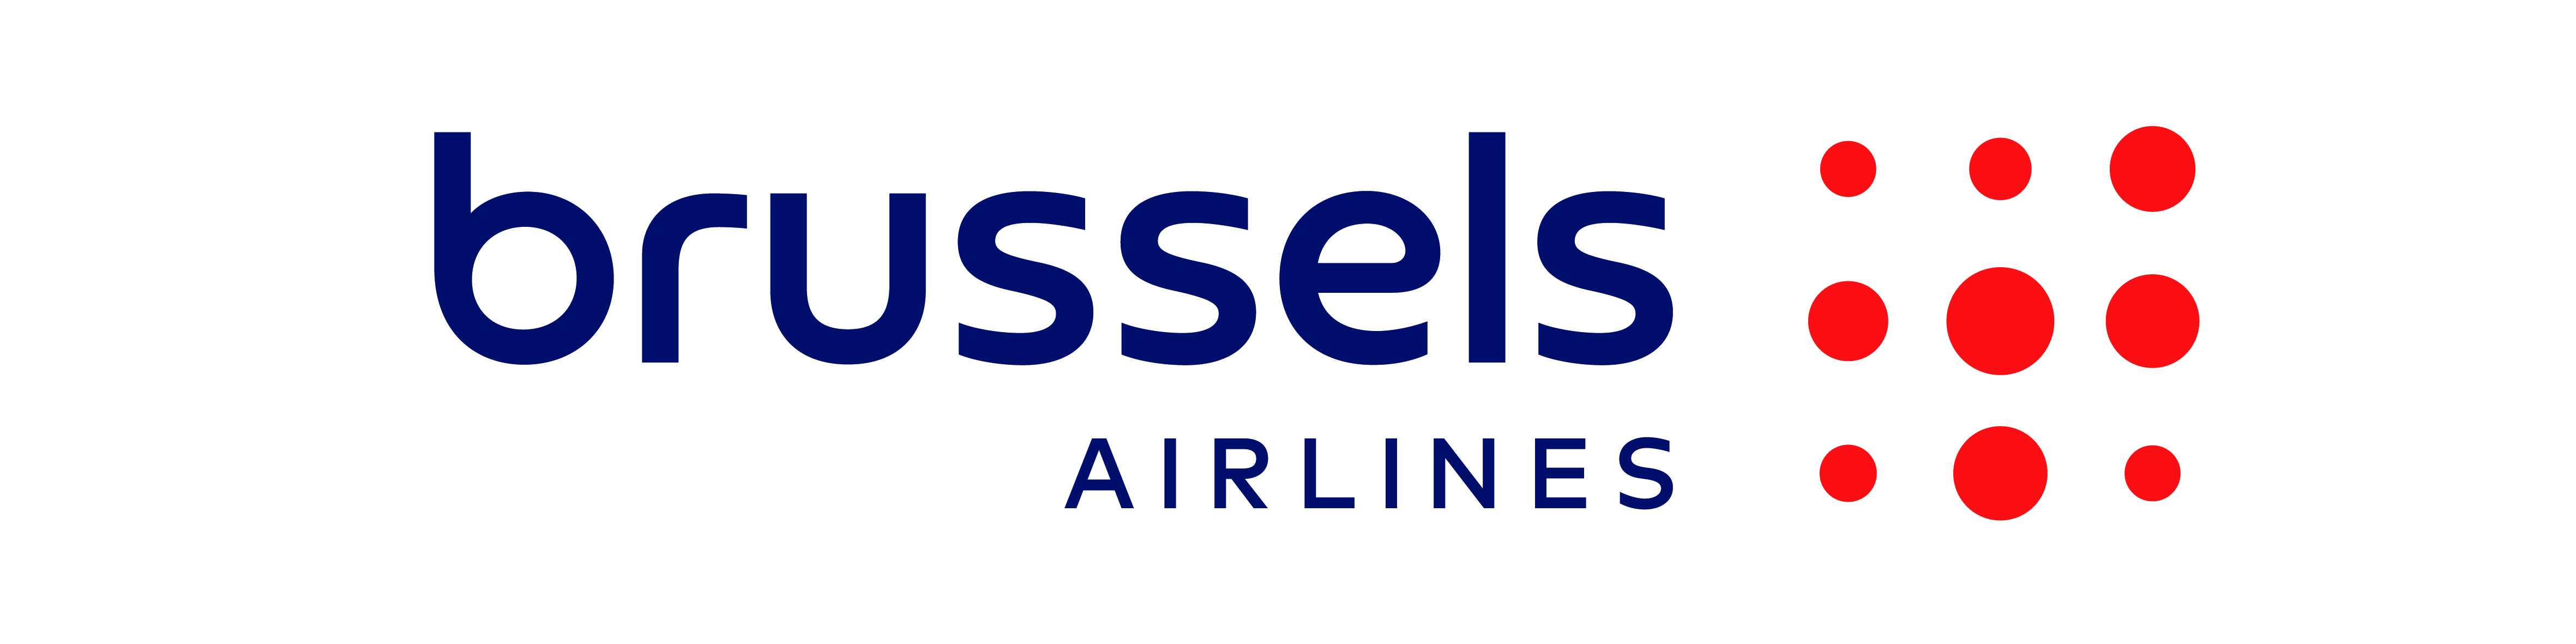 Brussels-Airlines